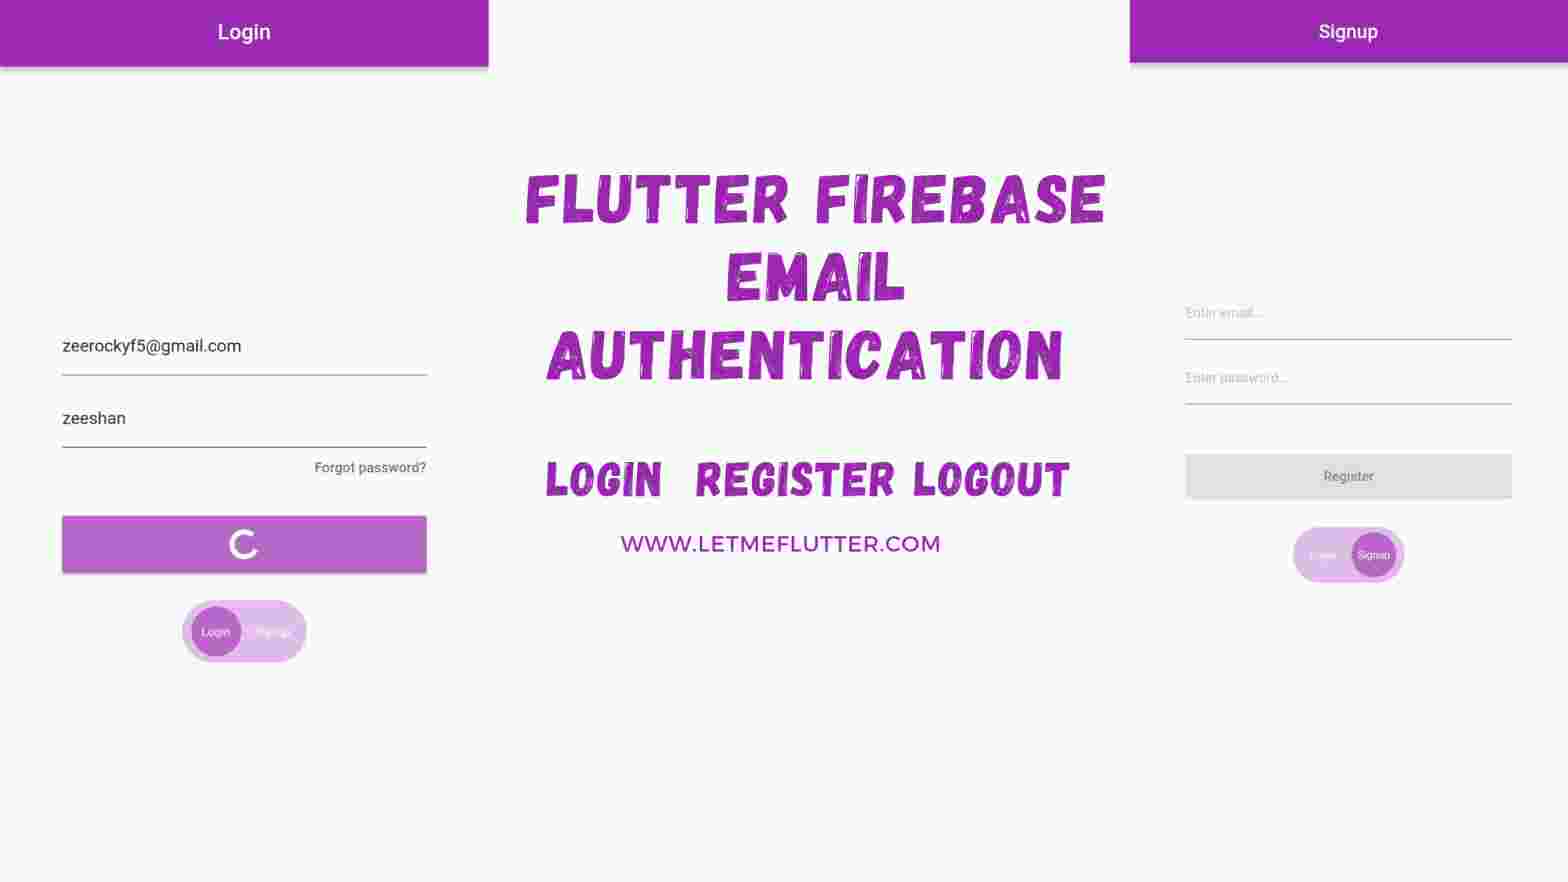 flutter firebase email authentication